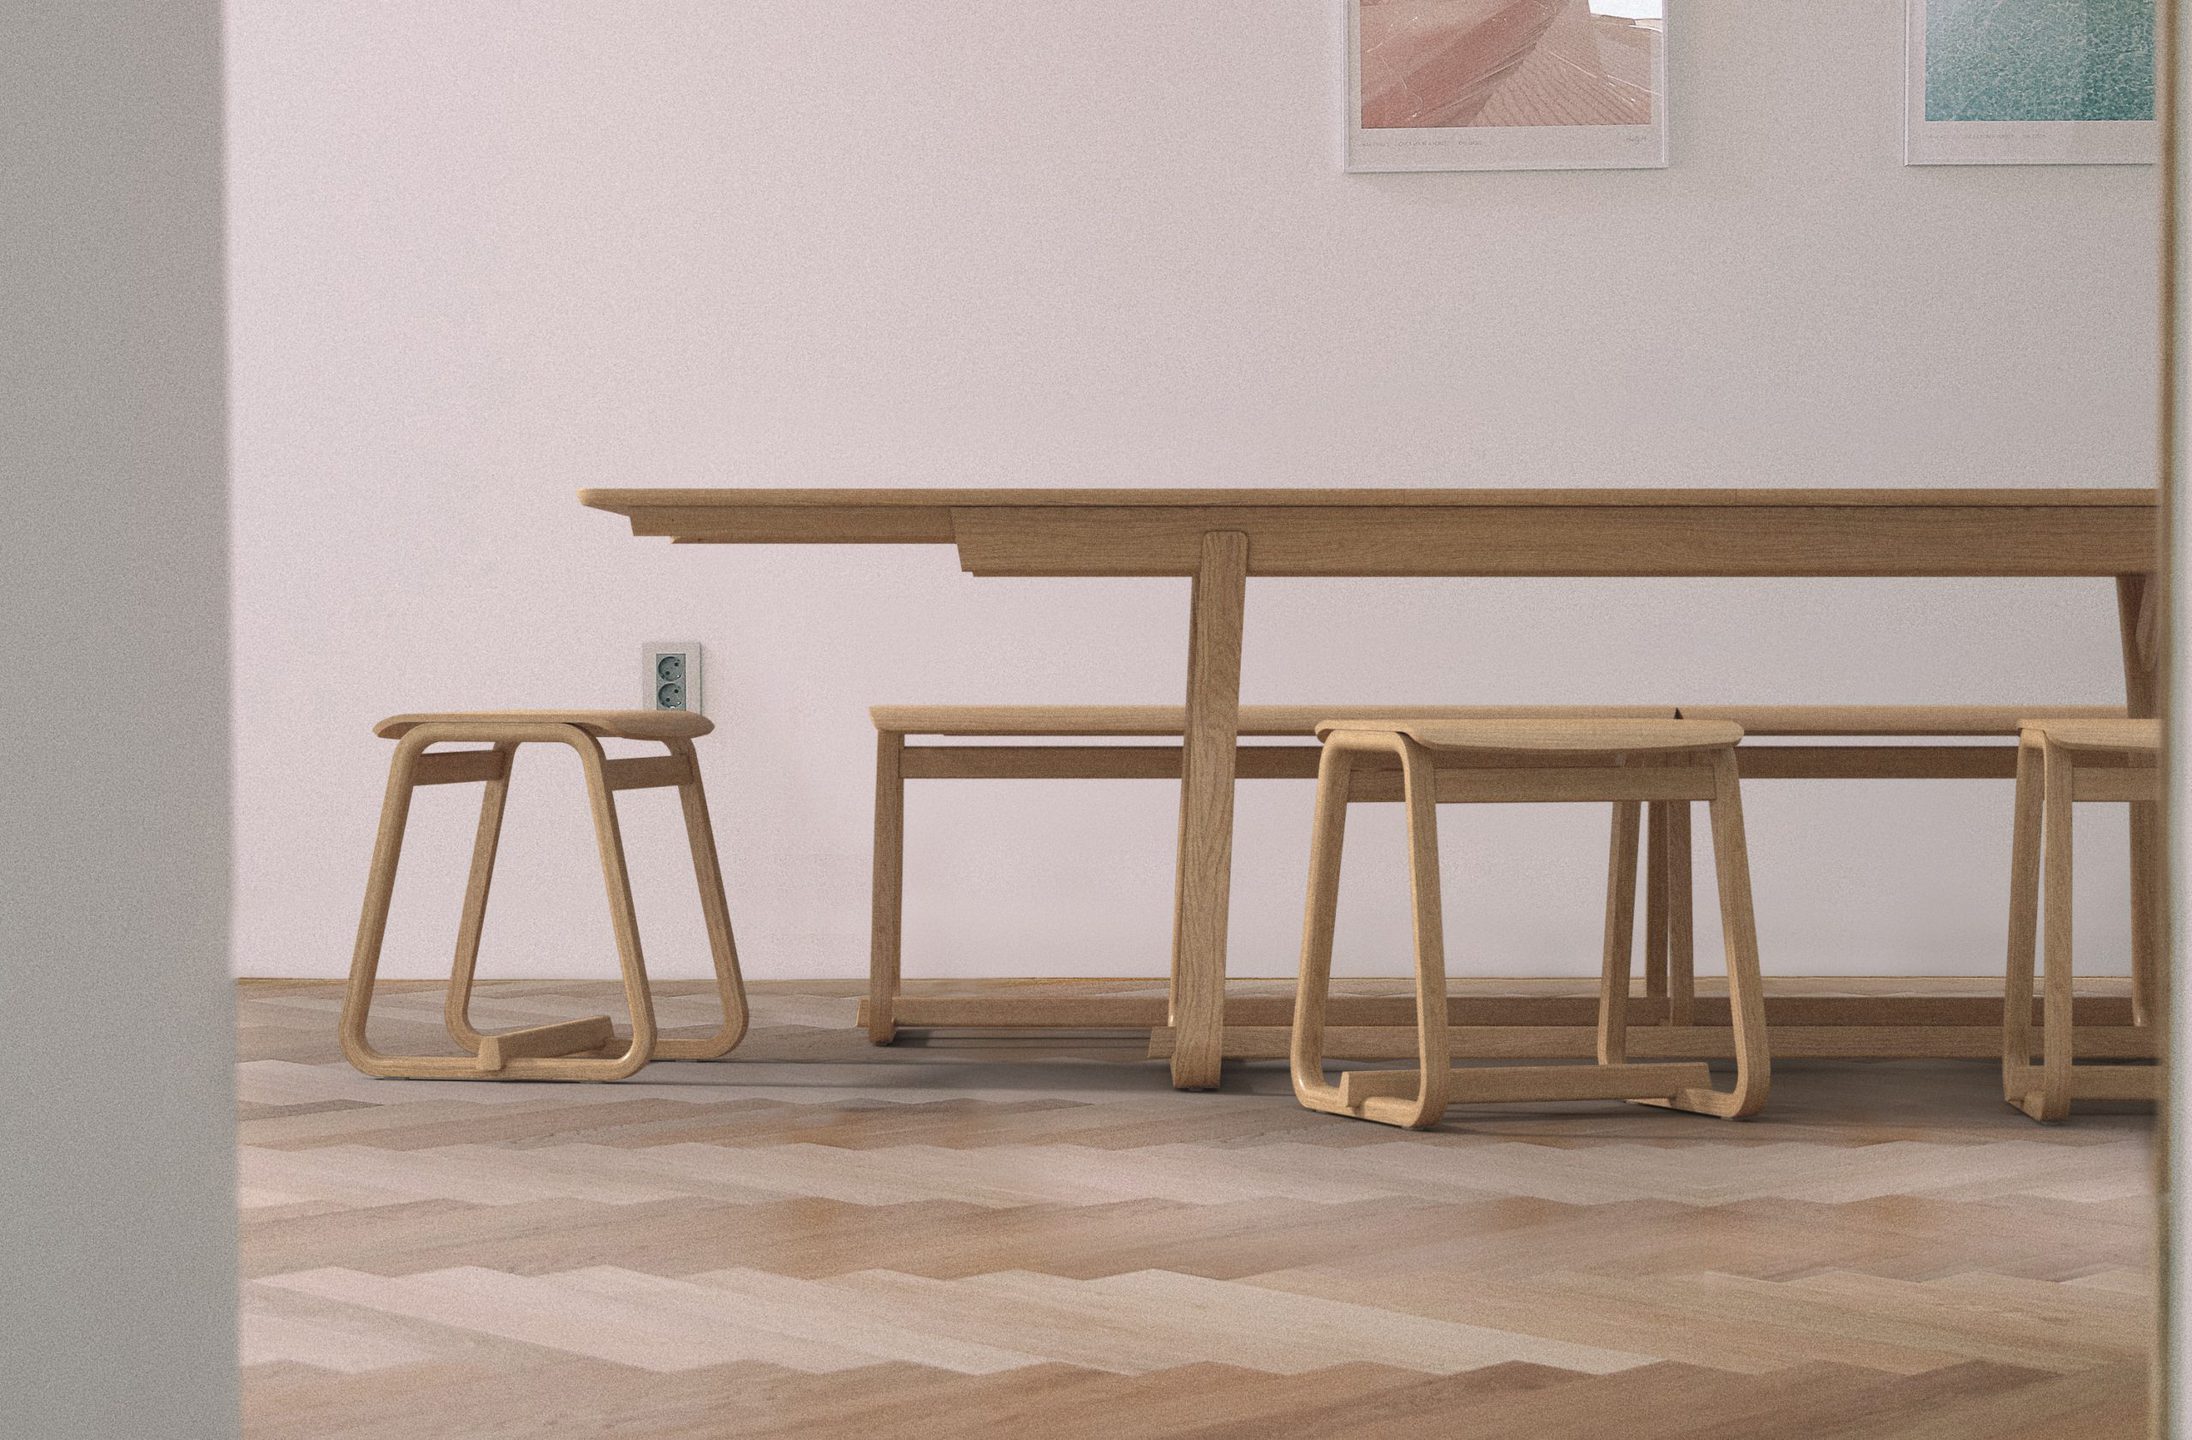 Extending dining room Table with matching stools in natural oak